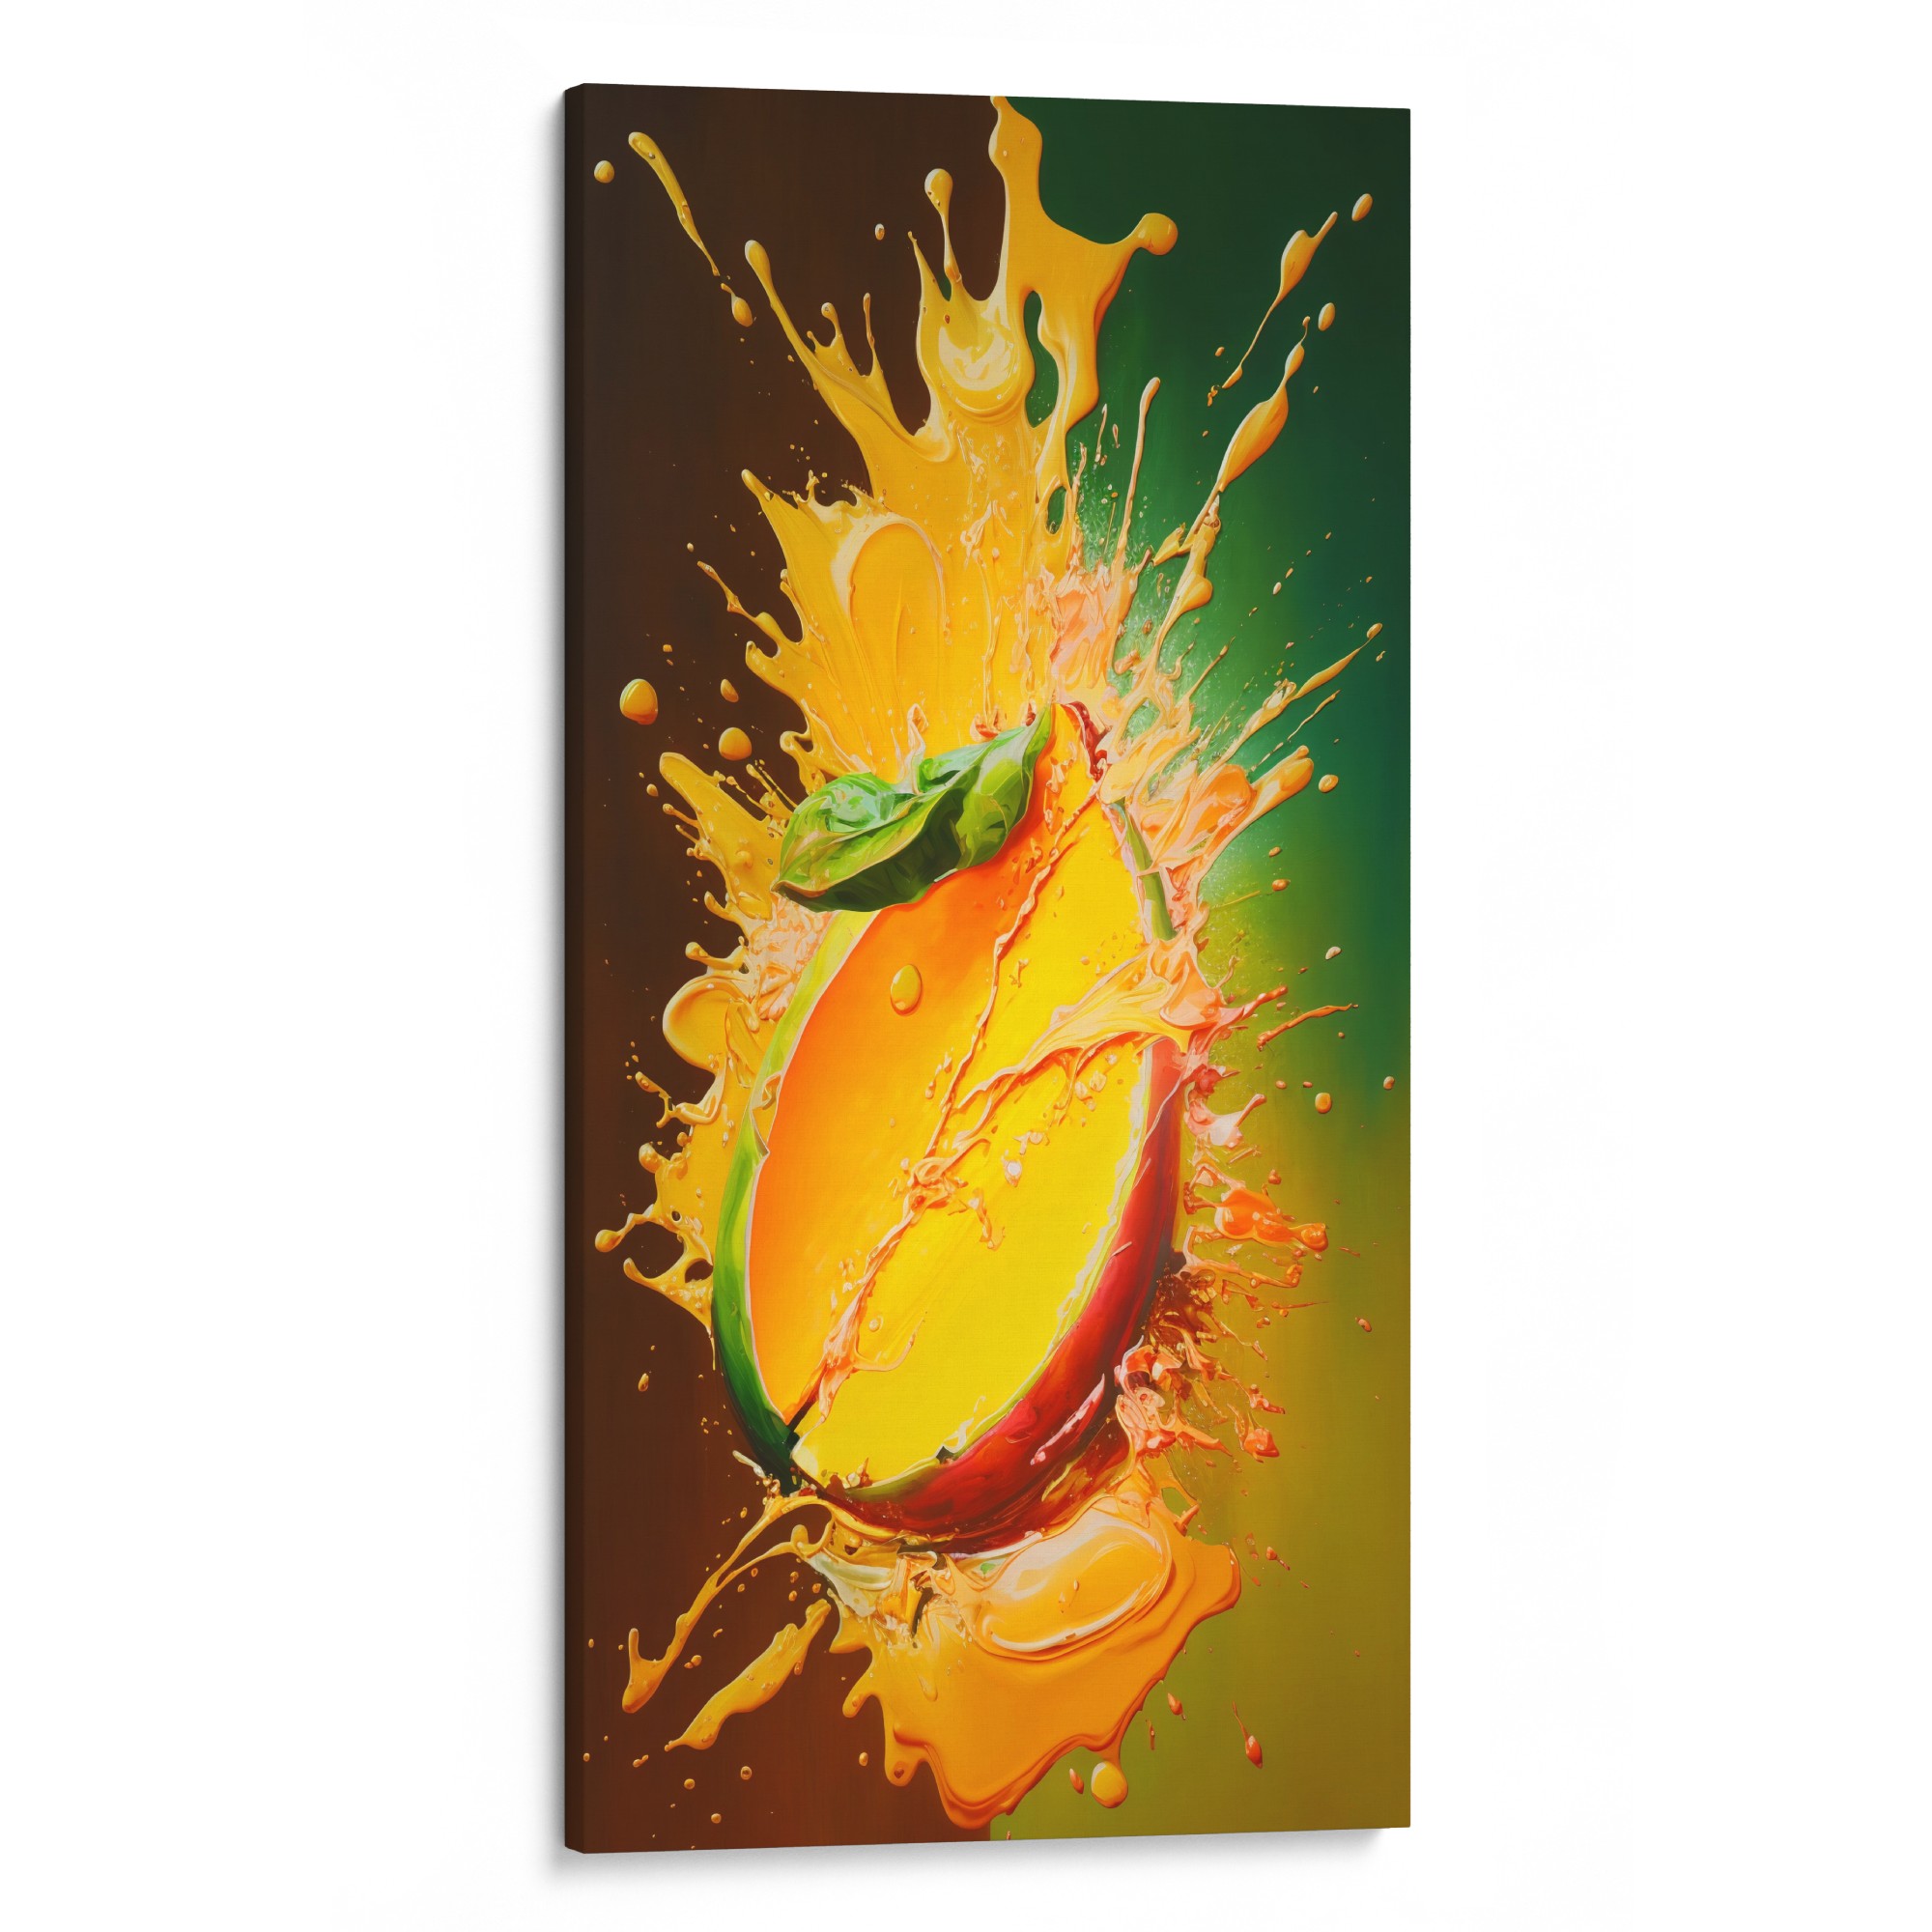 MANGO MAGIC Unique Canvas - Tropical delight for modern spaces, exclusively at Koh Chang Art Studio.